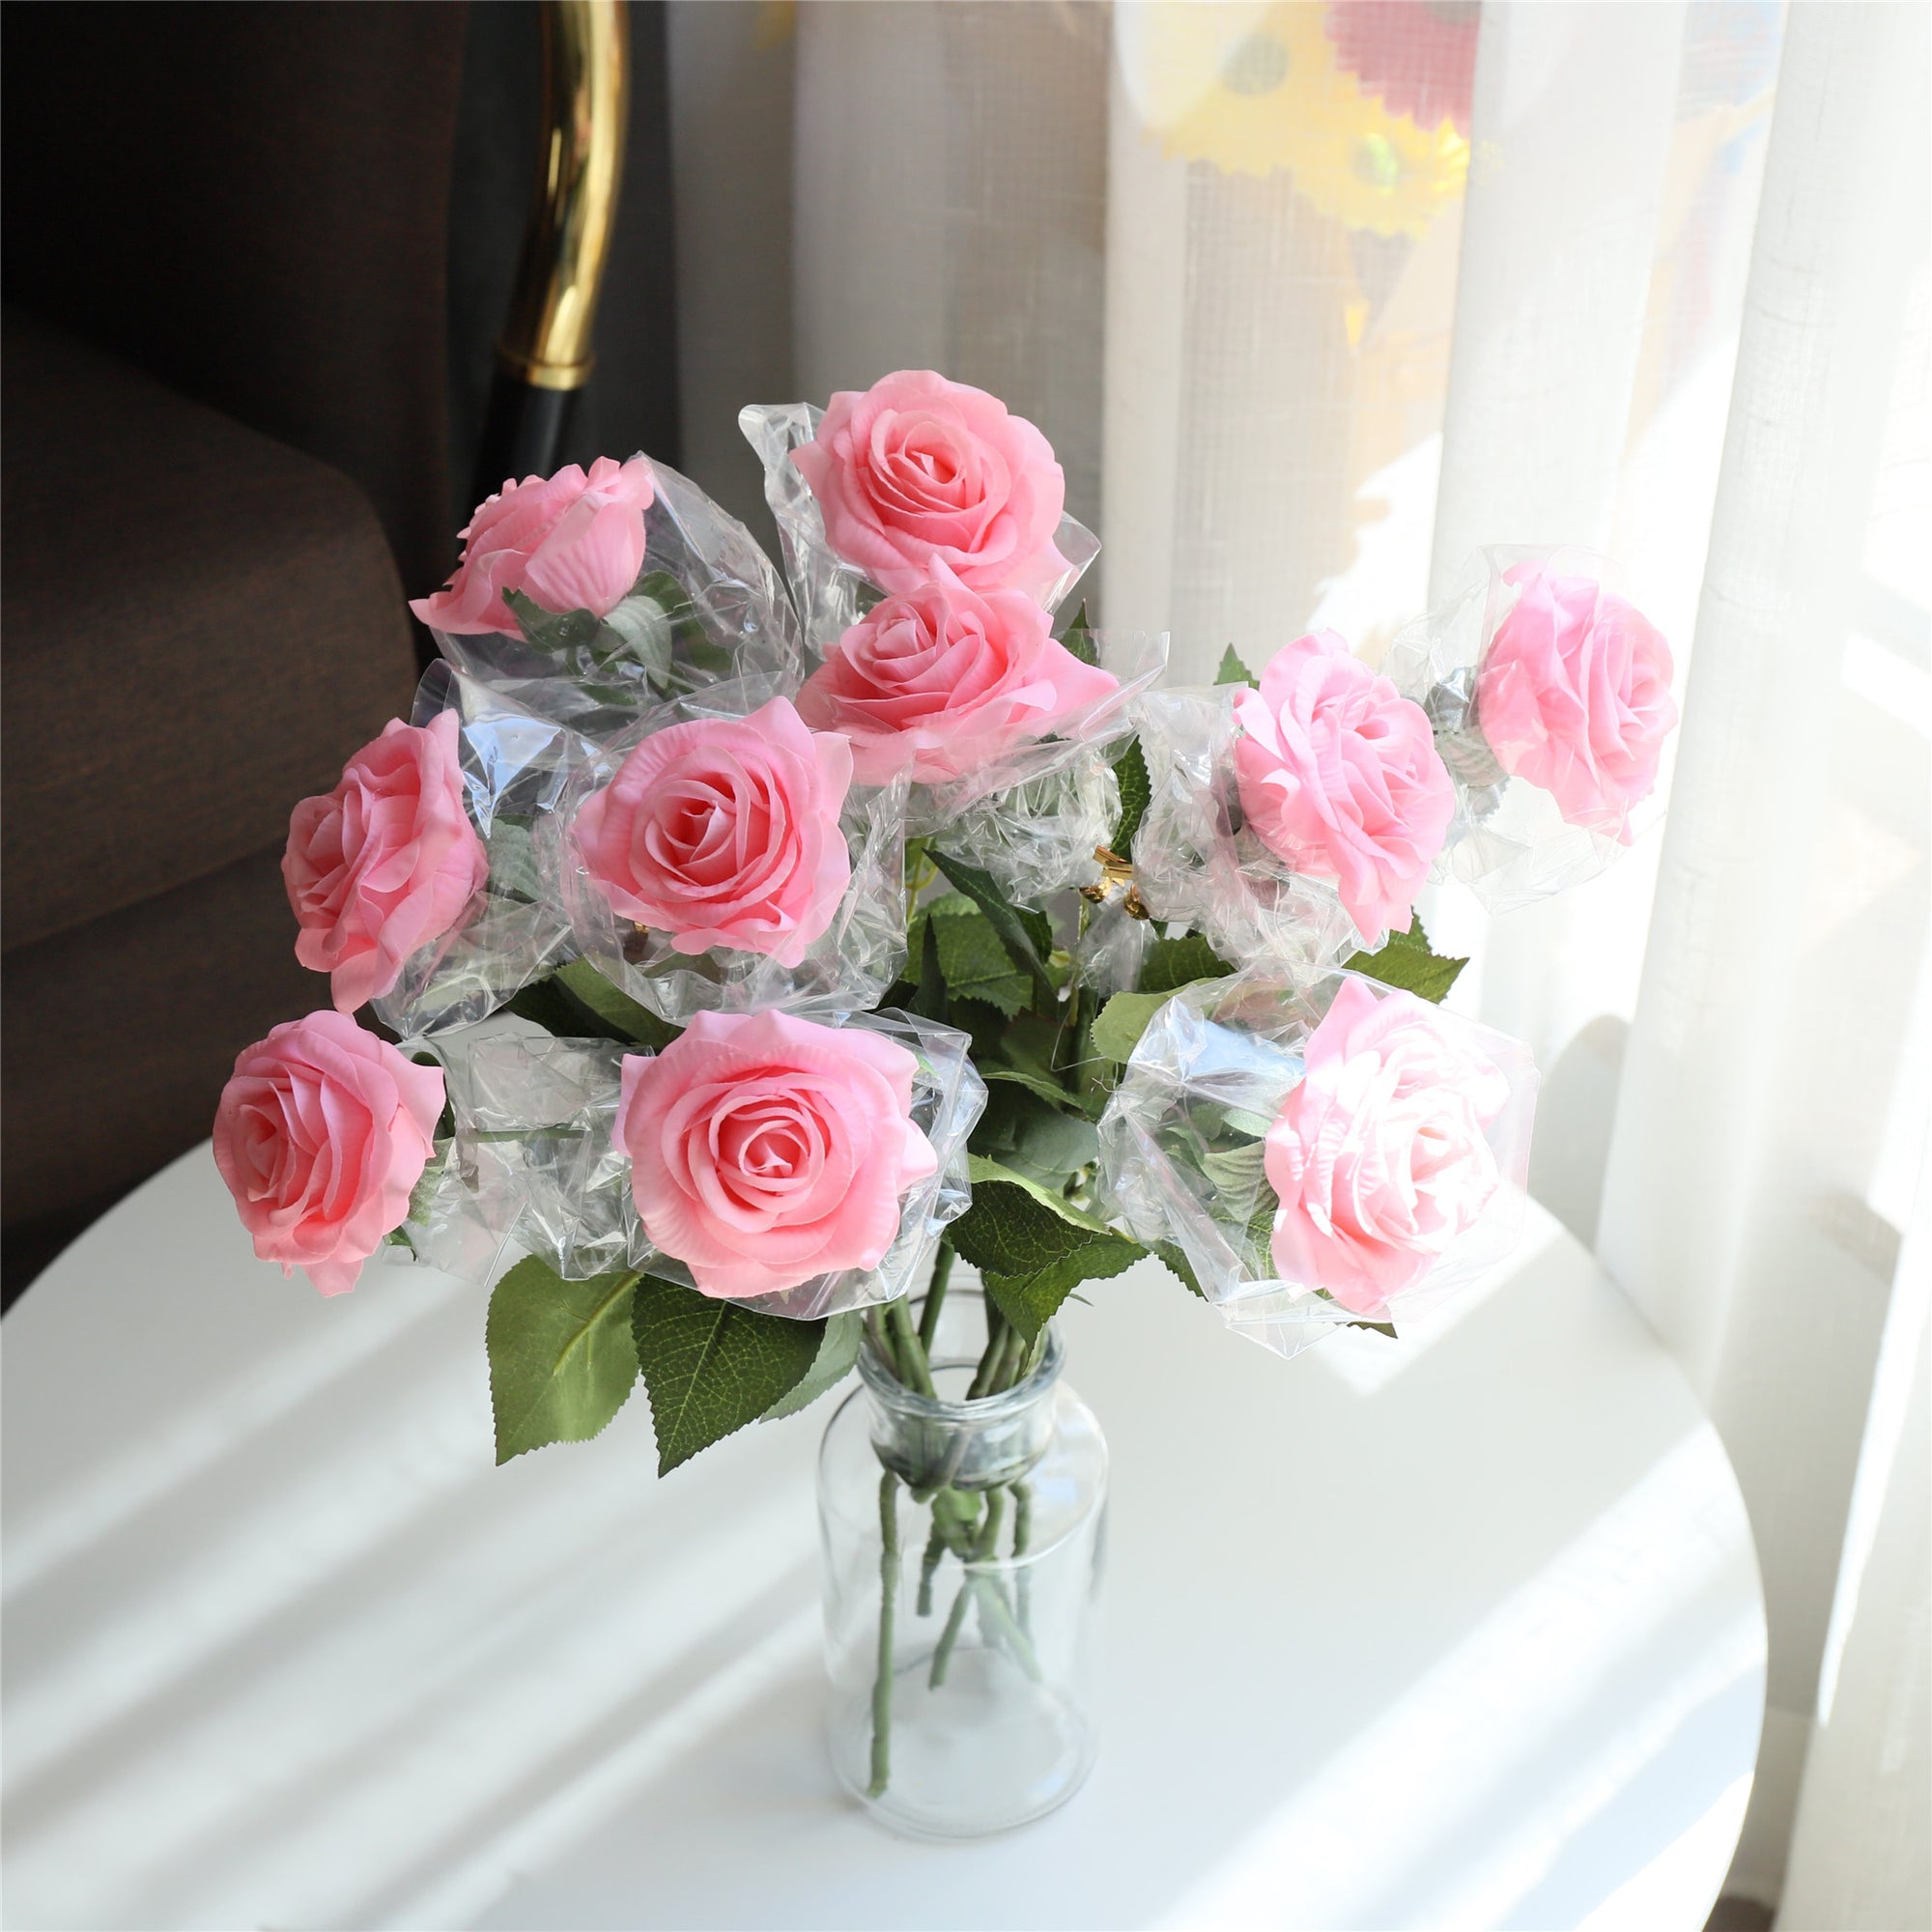 Real Touch Flowers Soft Pink Roses Bulk 50 Flowers